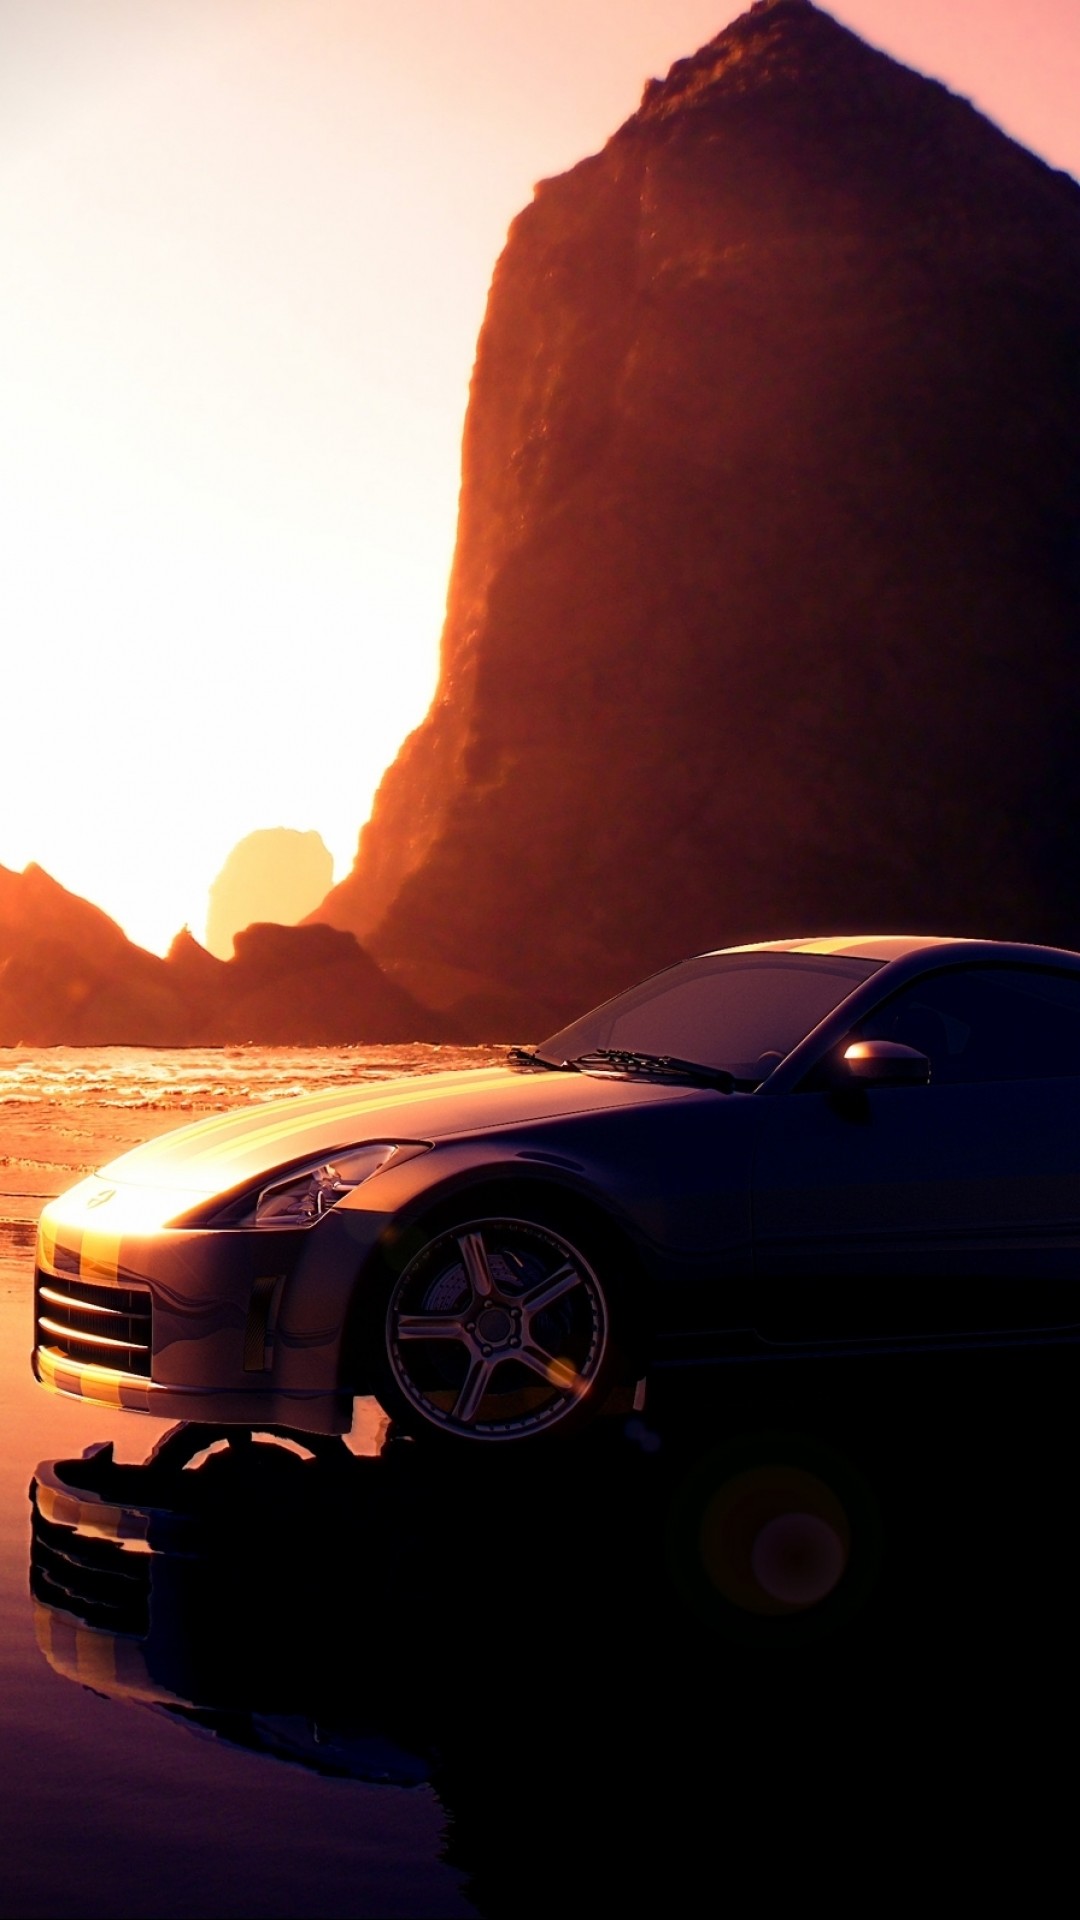 Fairlady Z Z33 Iphone Wallpapers